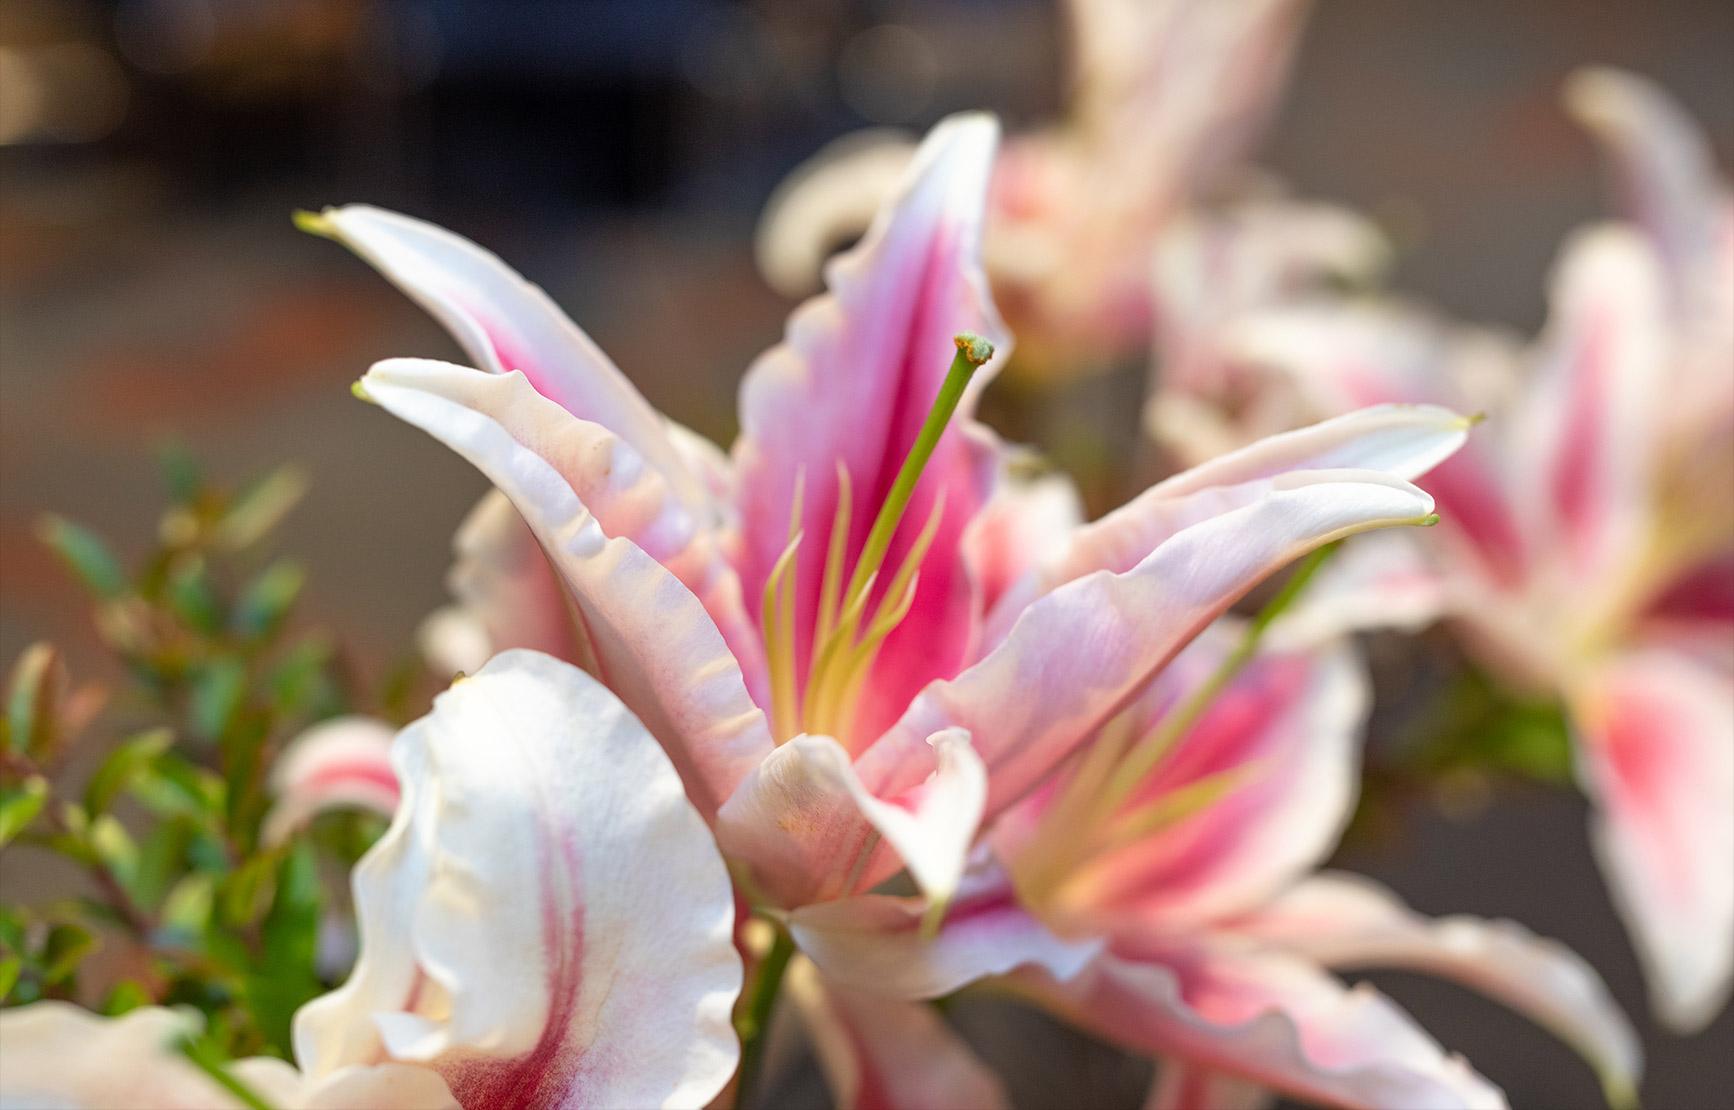 A vibrant pink, white and yellow lily flower on a table display at a College of Science event.